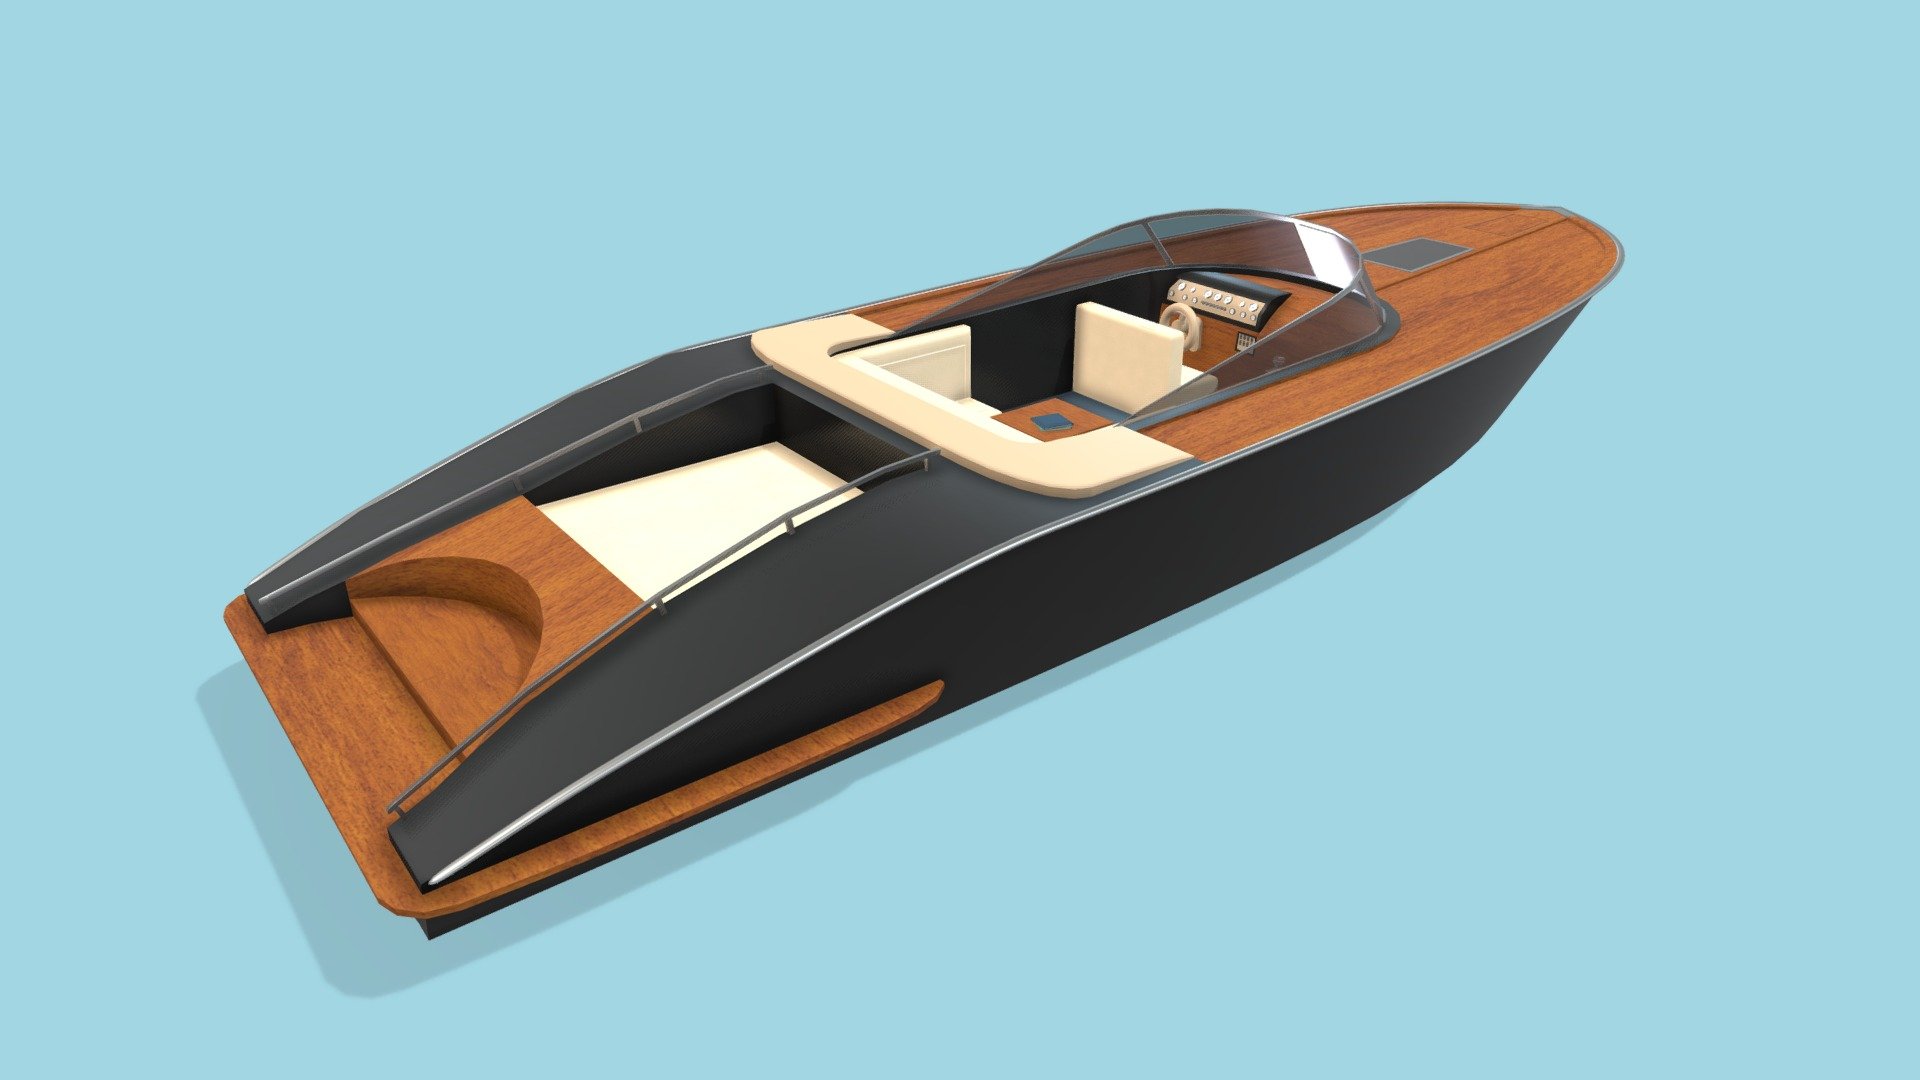 3D model of a luxury yacht inspired by the Riva Rivarama 44 yacht. This model was made using Blender 3d model